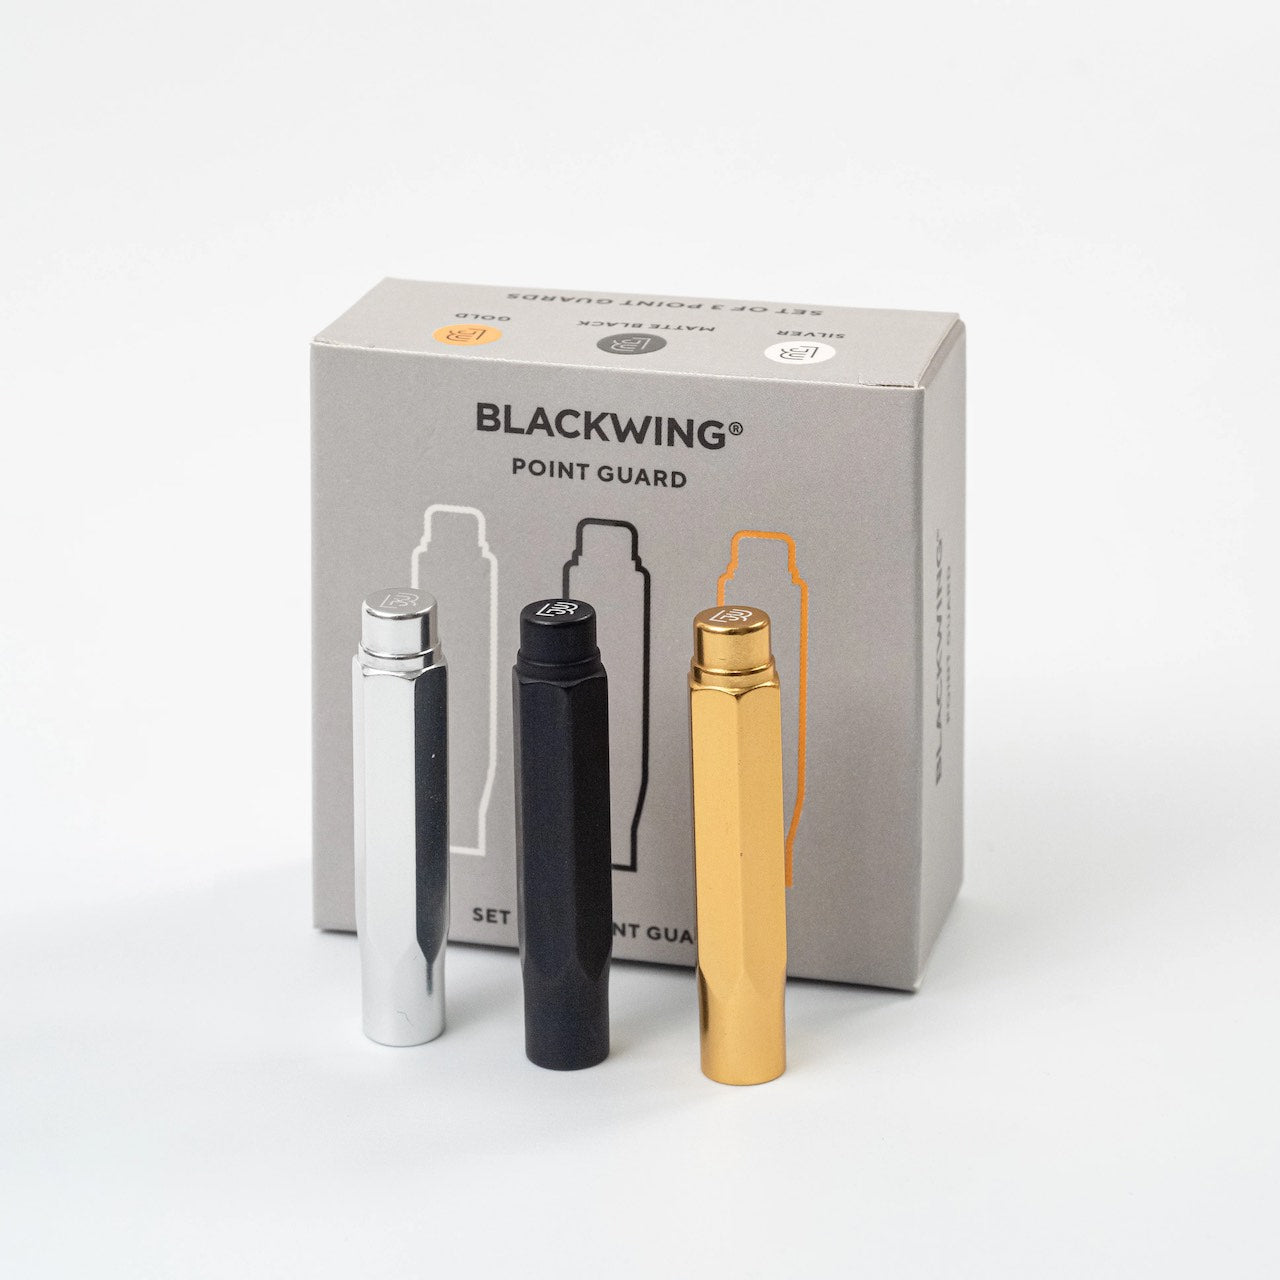 Blackwing-point-guard-box-front-simple-beautiful-things